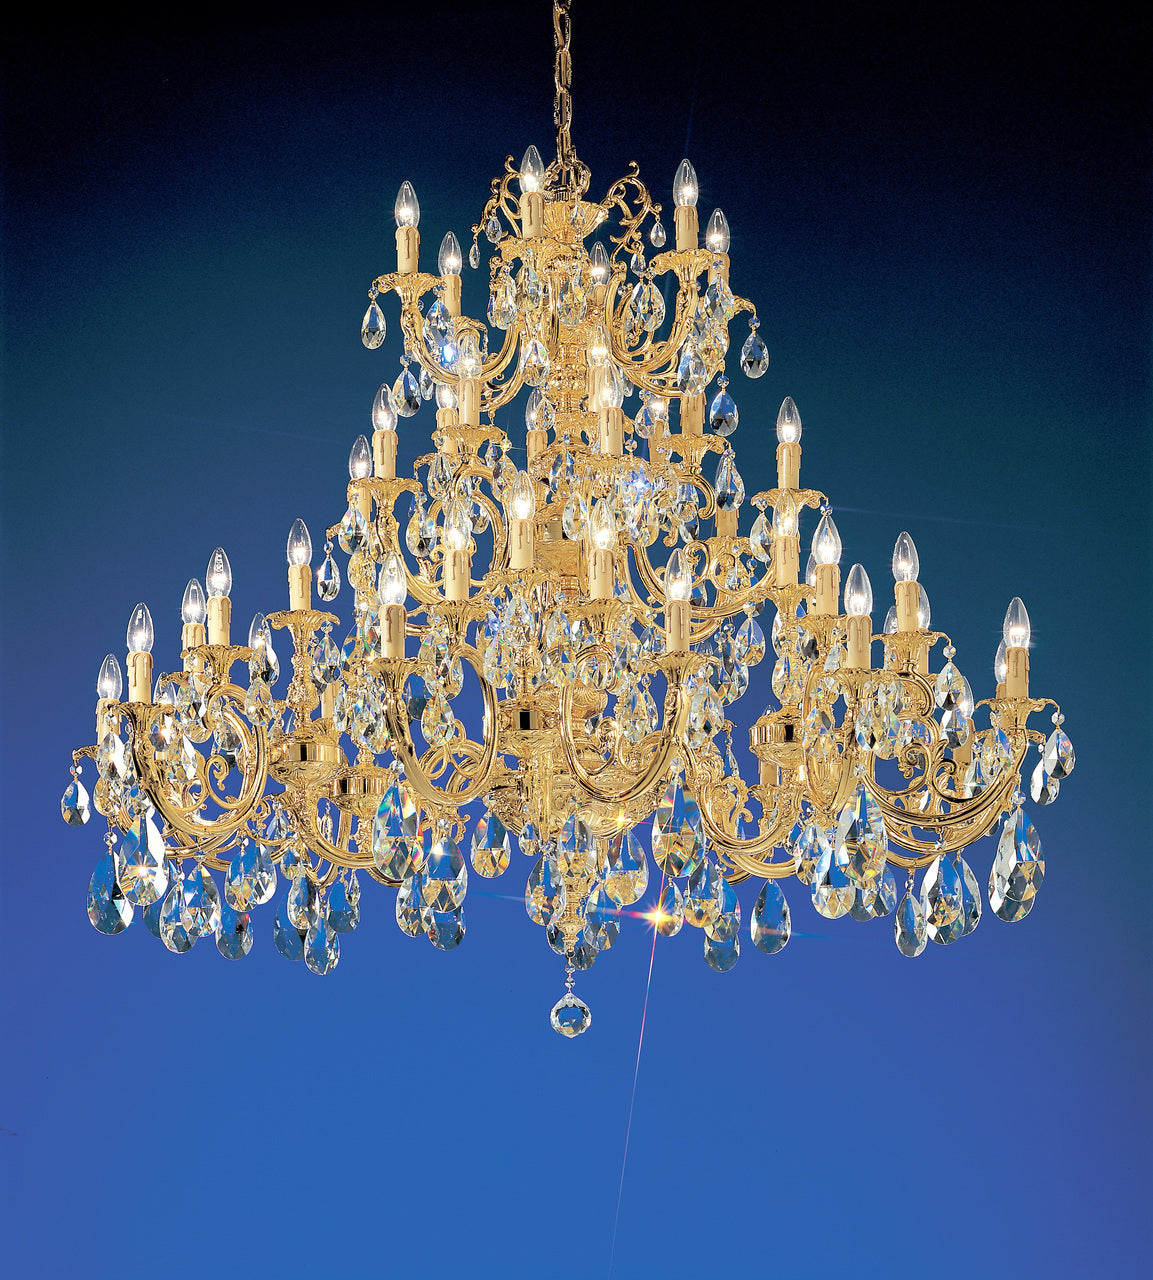 Classic Lighting 5748 G Princeton Cast Brass Chandelier in 24k Gold (Imported from Spain)